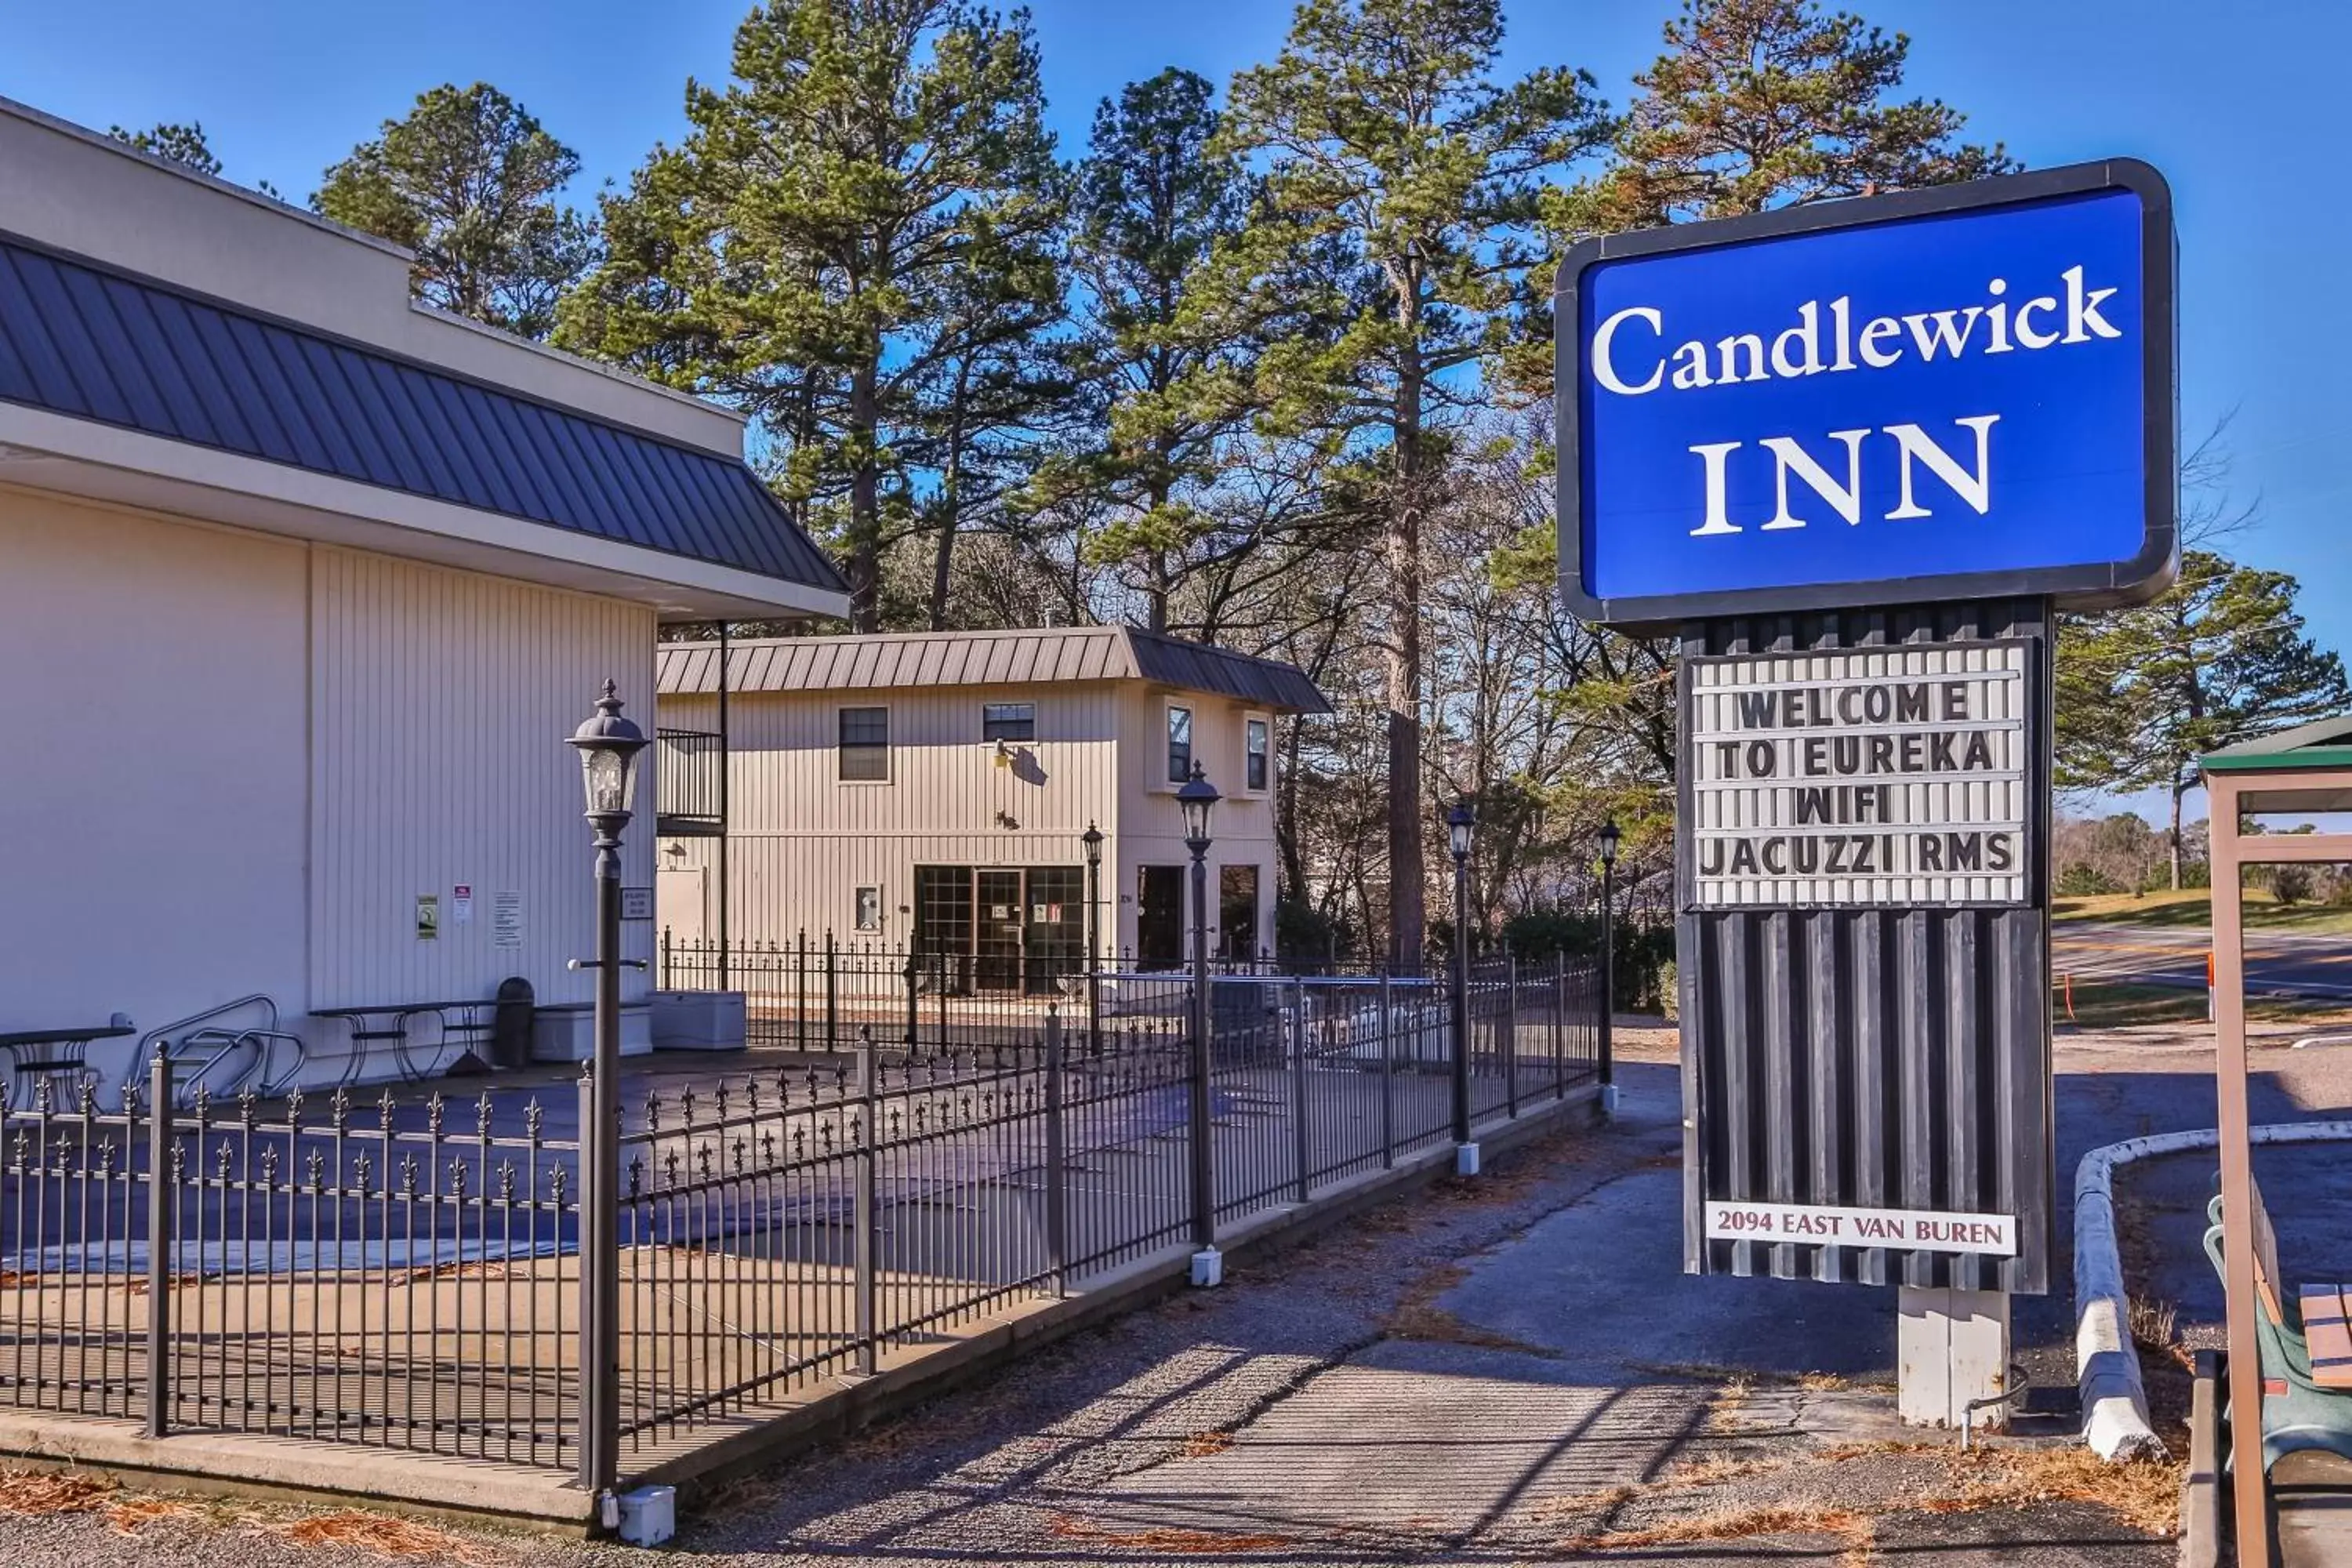 Property building in Candlewick Inn and Suites